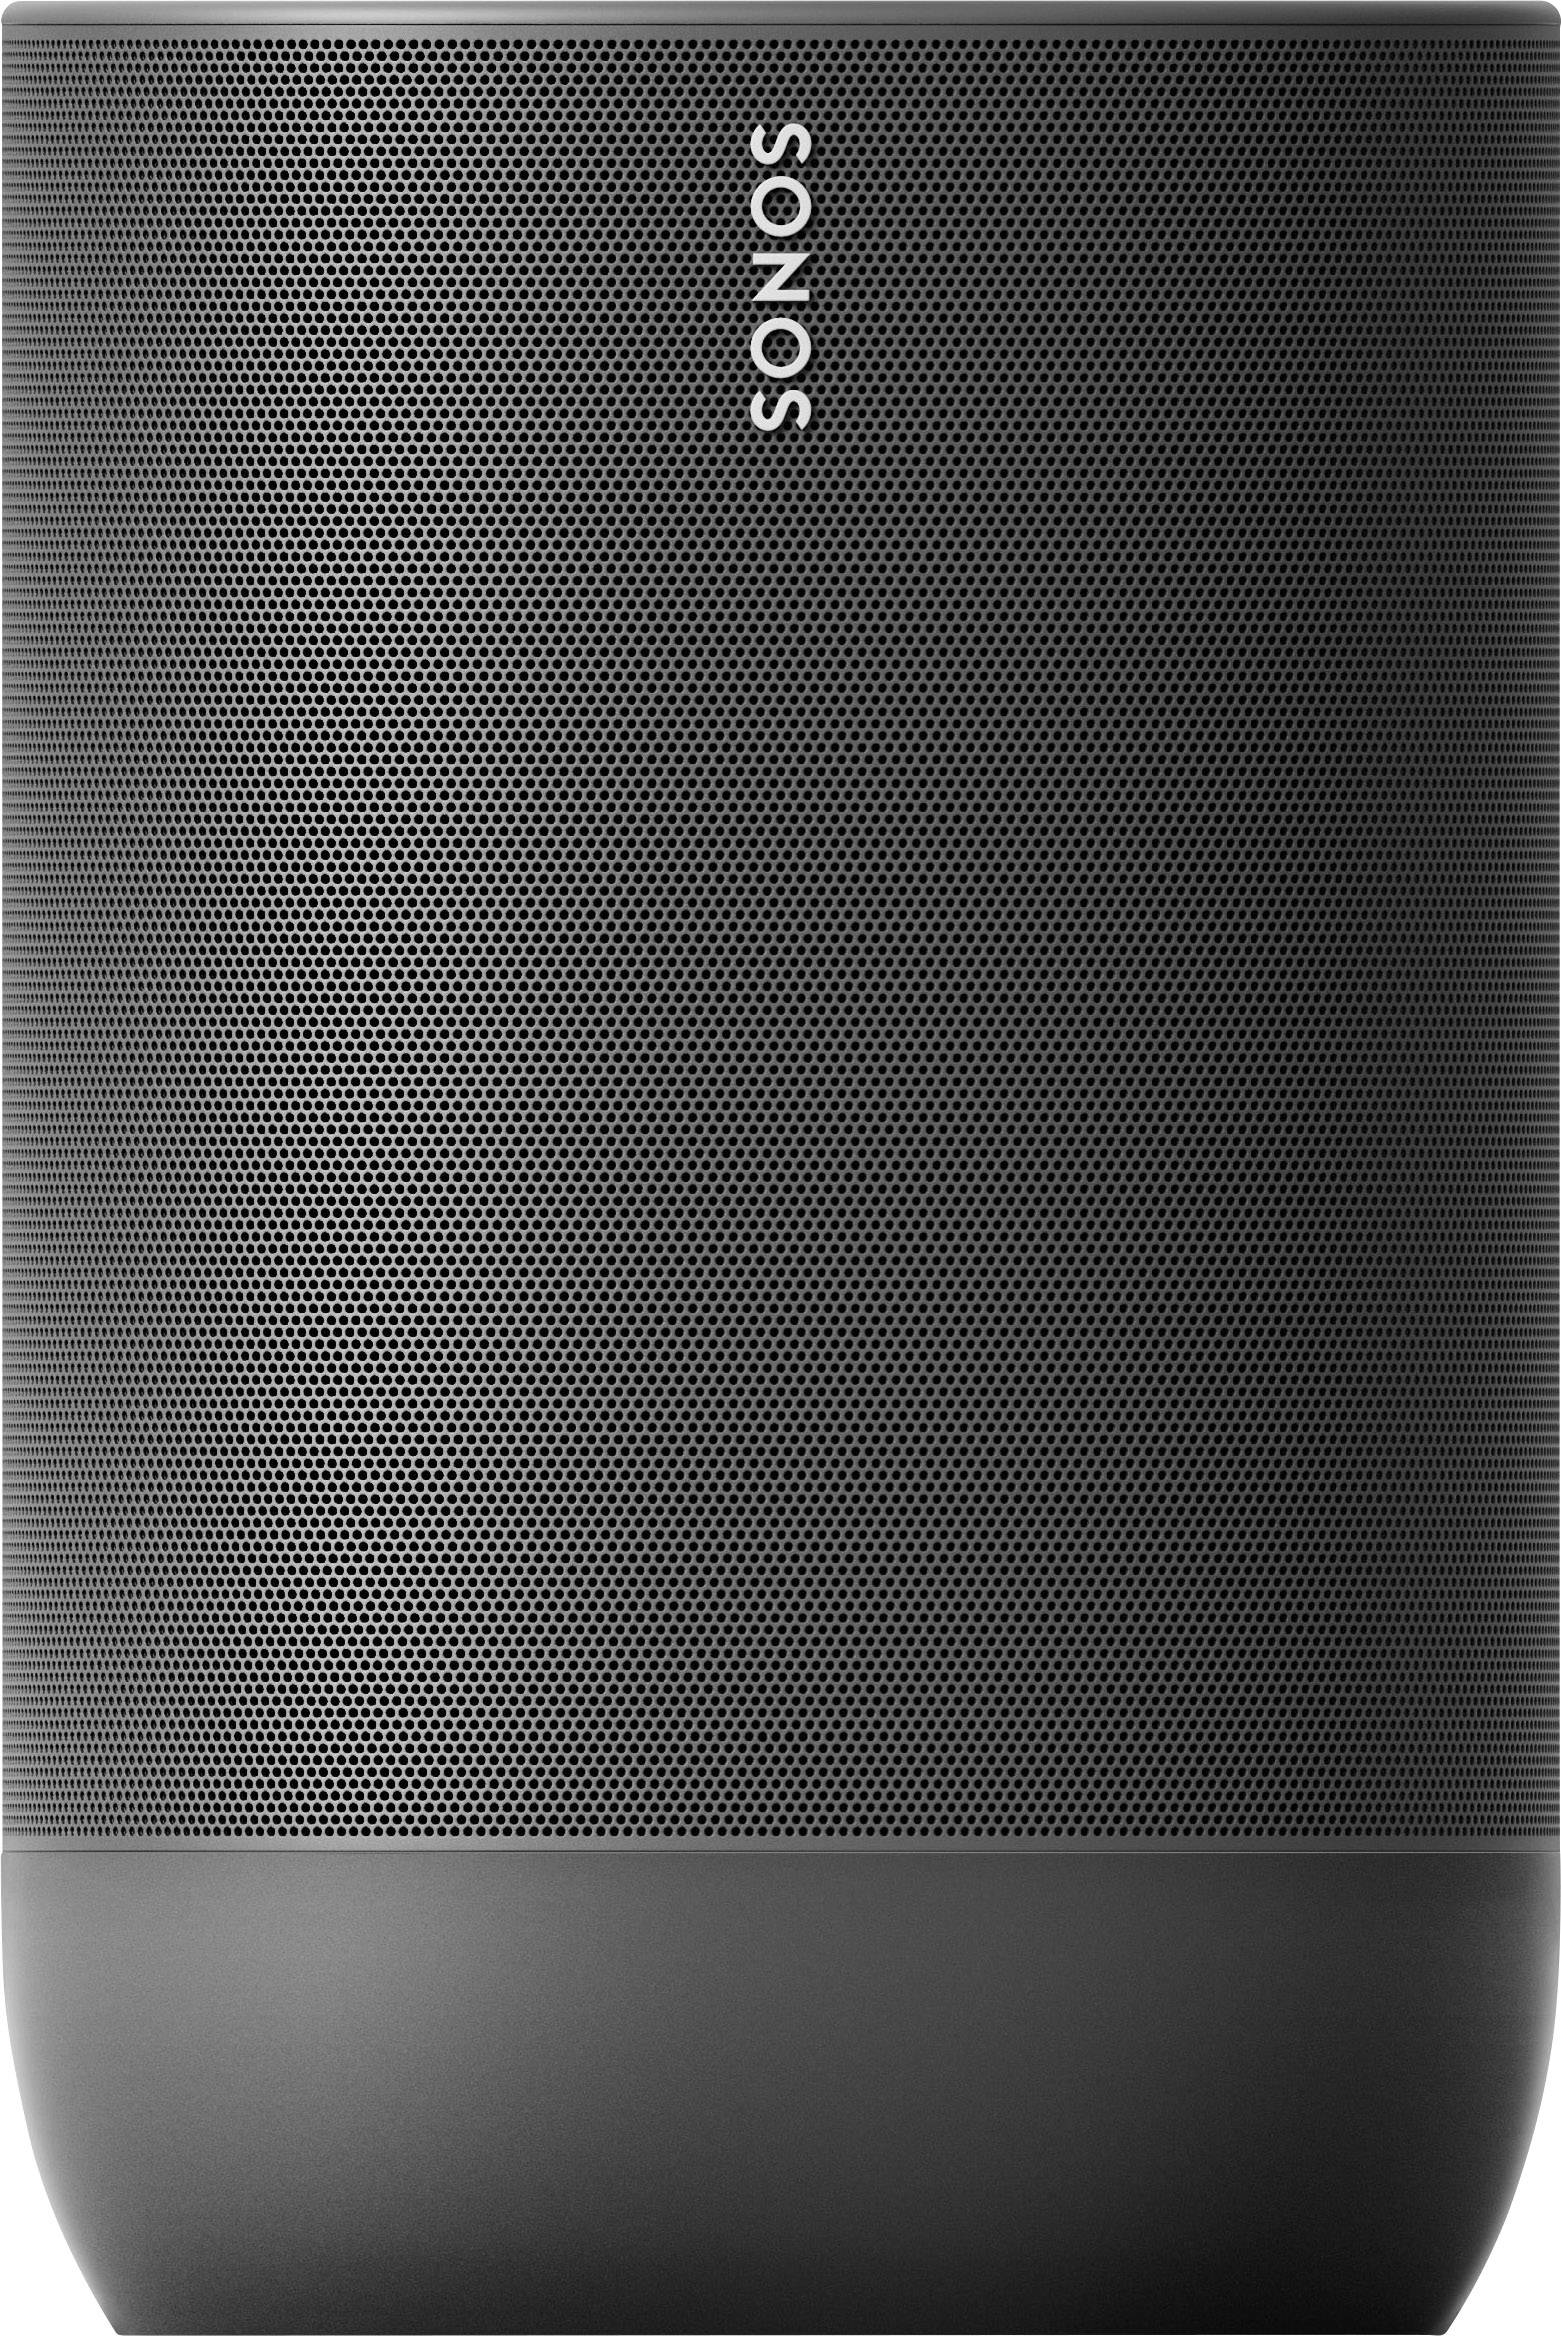 Sonos Move Multi-room AirPlay, Wi-Fi Built-in Amazon Alexa, Built-in Google Assistant, Outdoor, shoc |